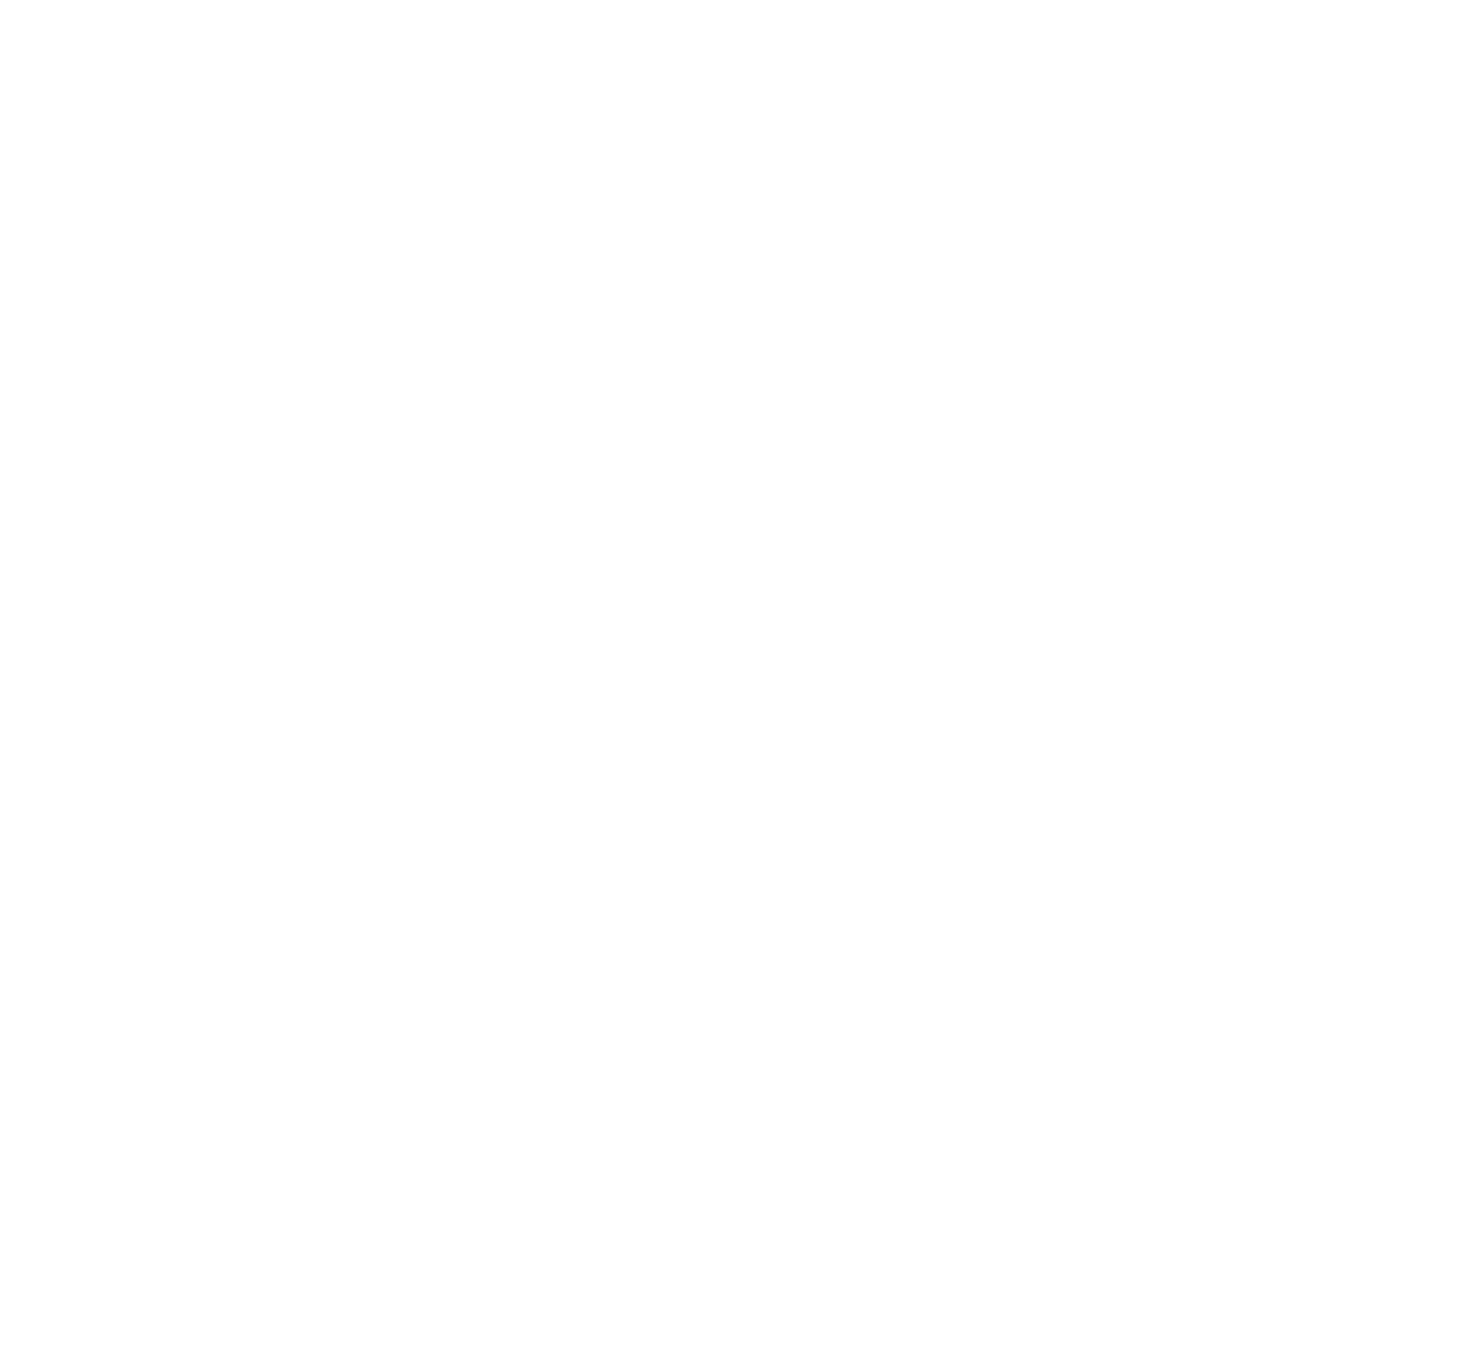 Austin Business Journal's 2020 Commercial Real Estate Awards Deal of the Year